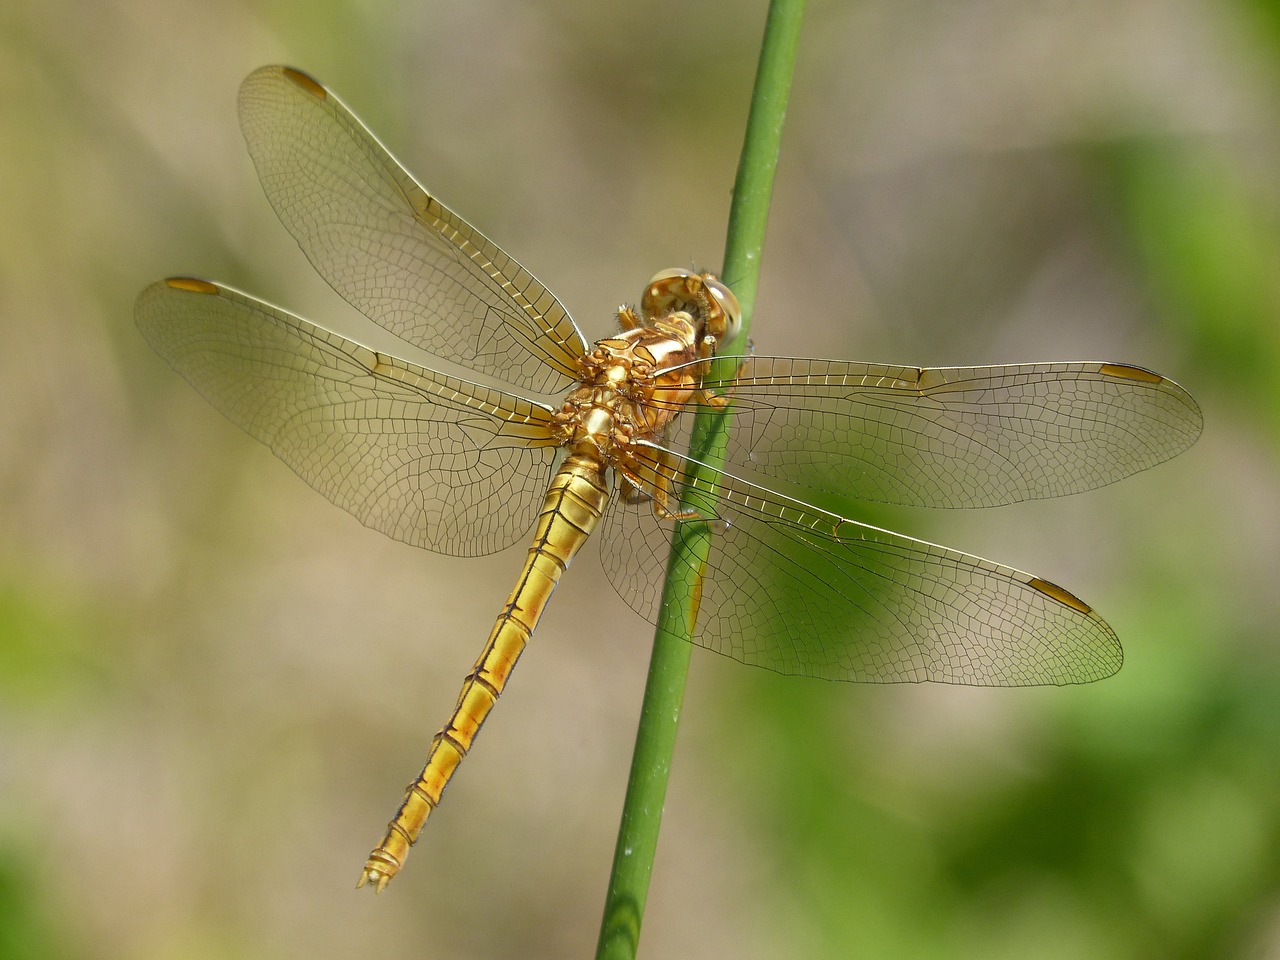 Dragonfly,golden dragonfly,sympetrum fonscolombii,insect,stem